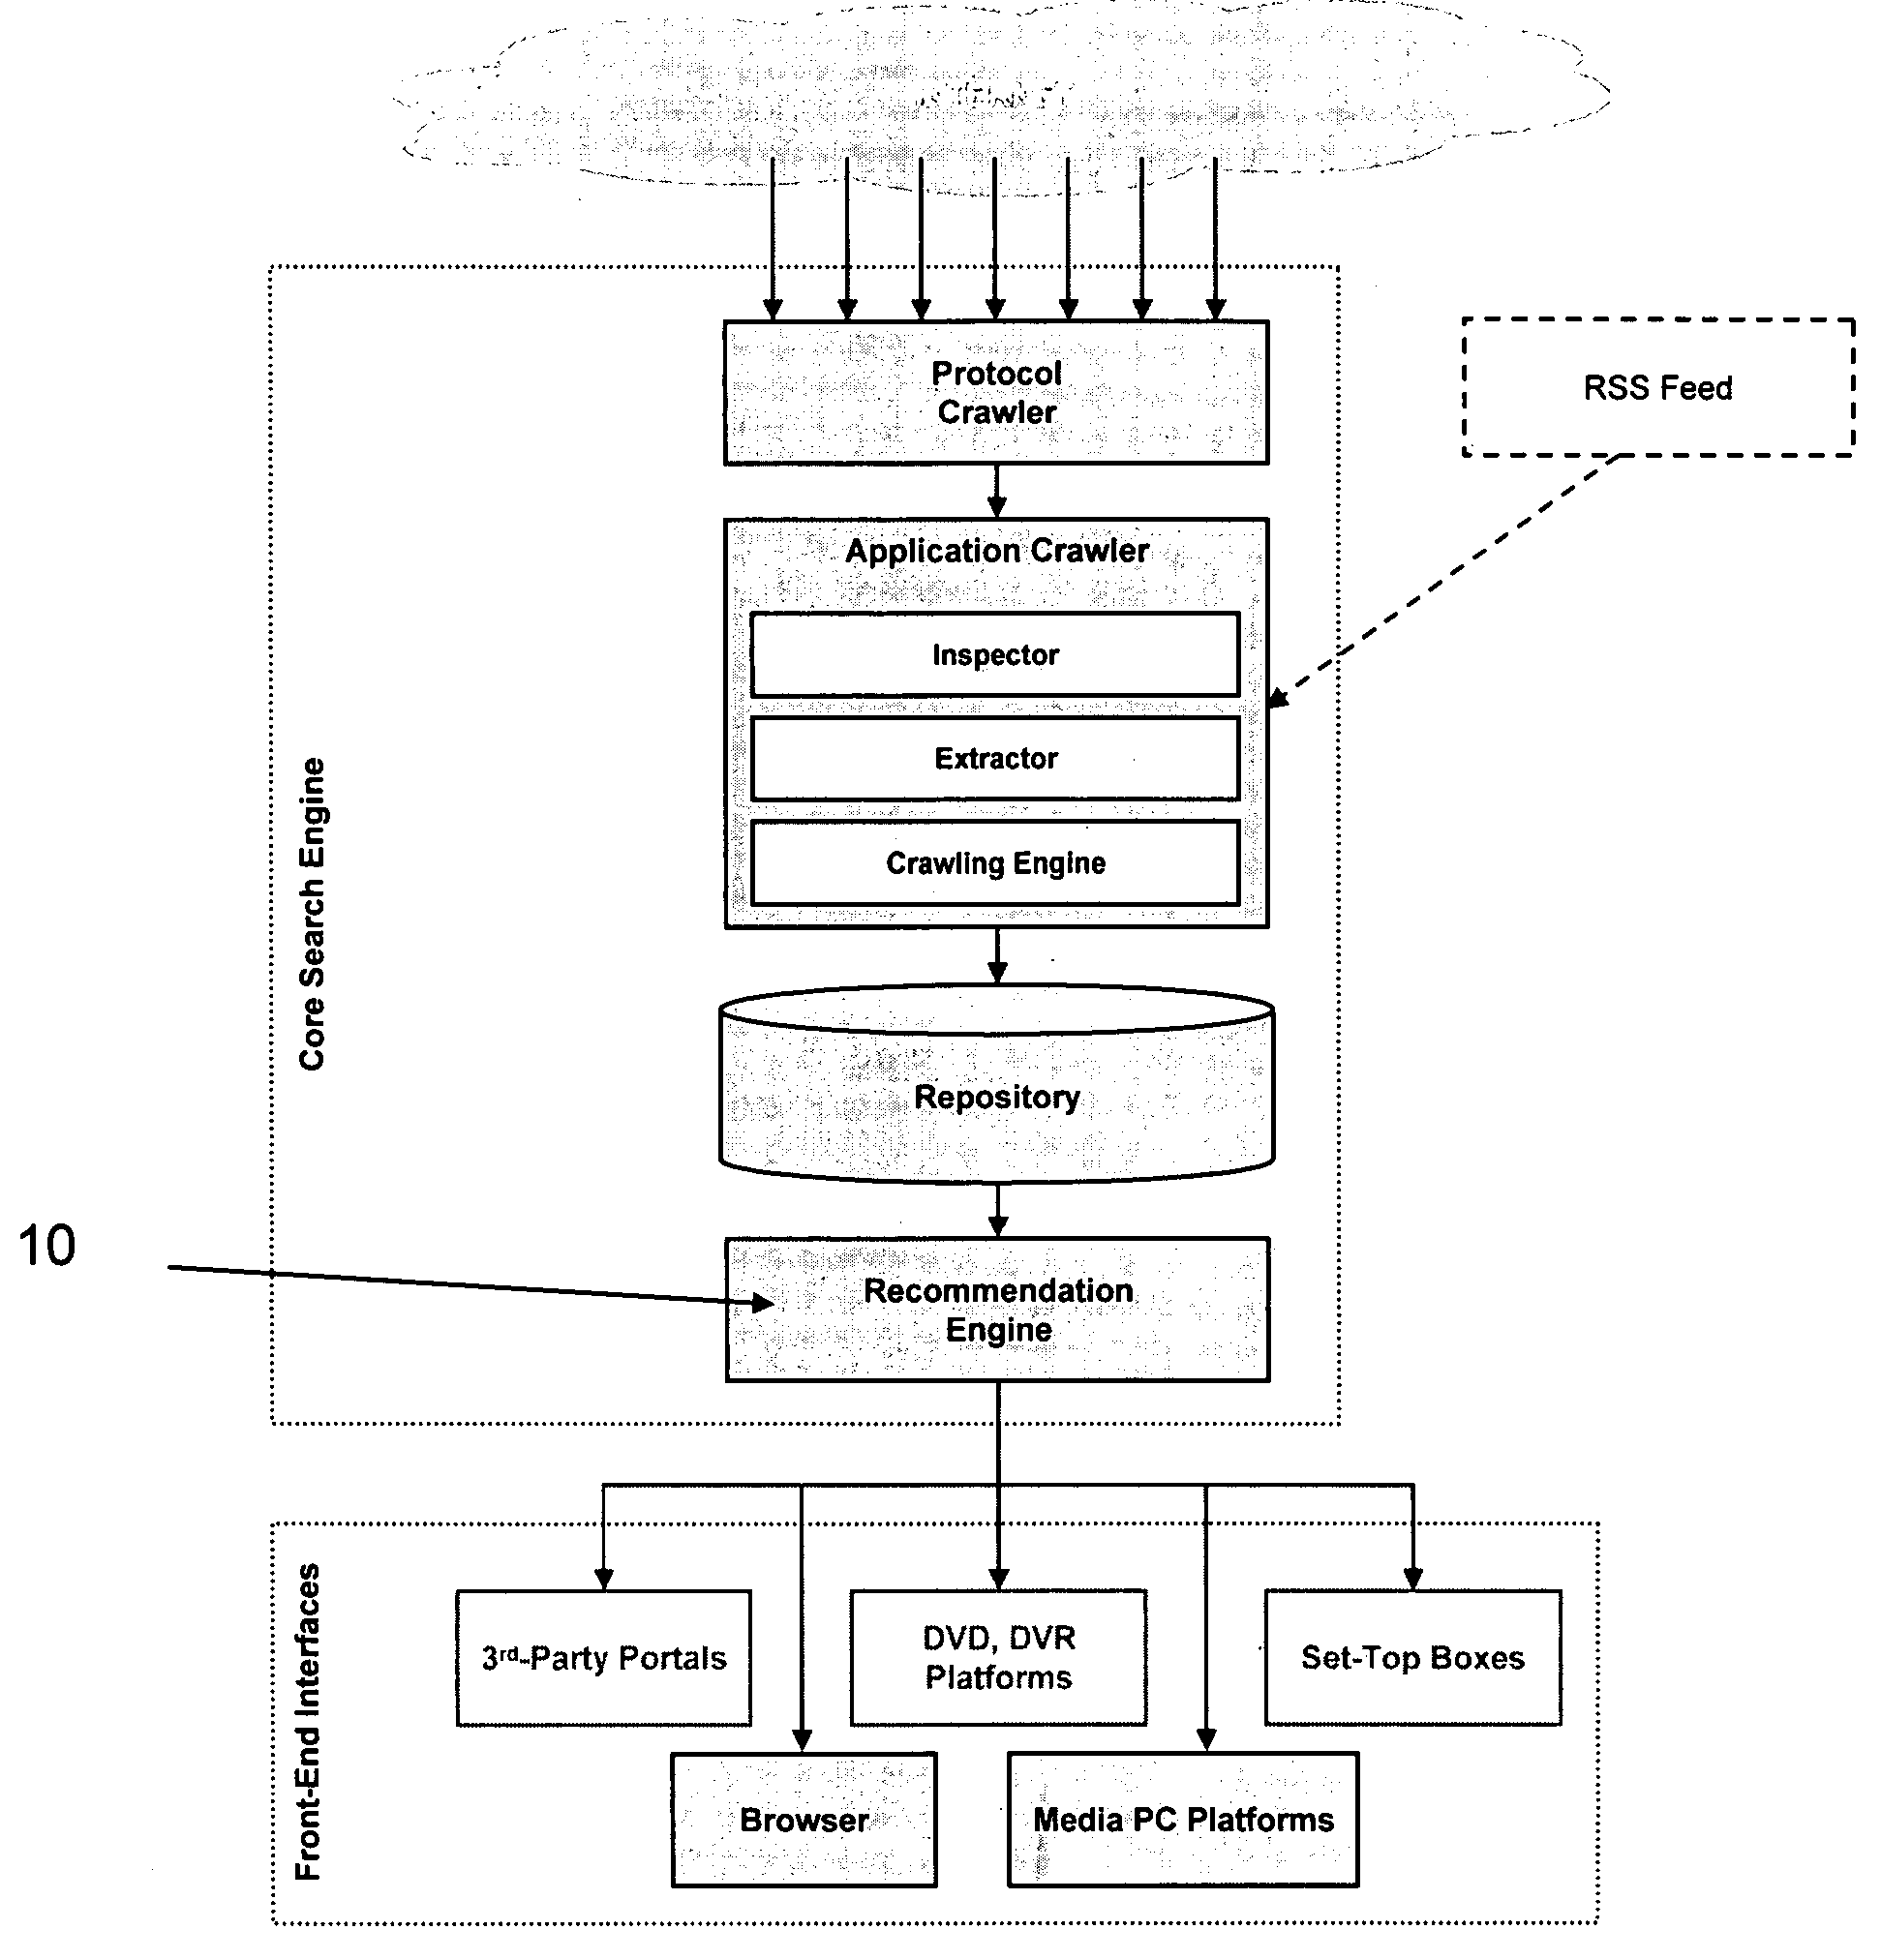 Method and apparatus for a ranking engine